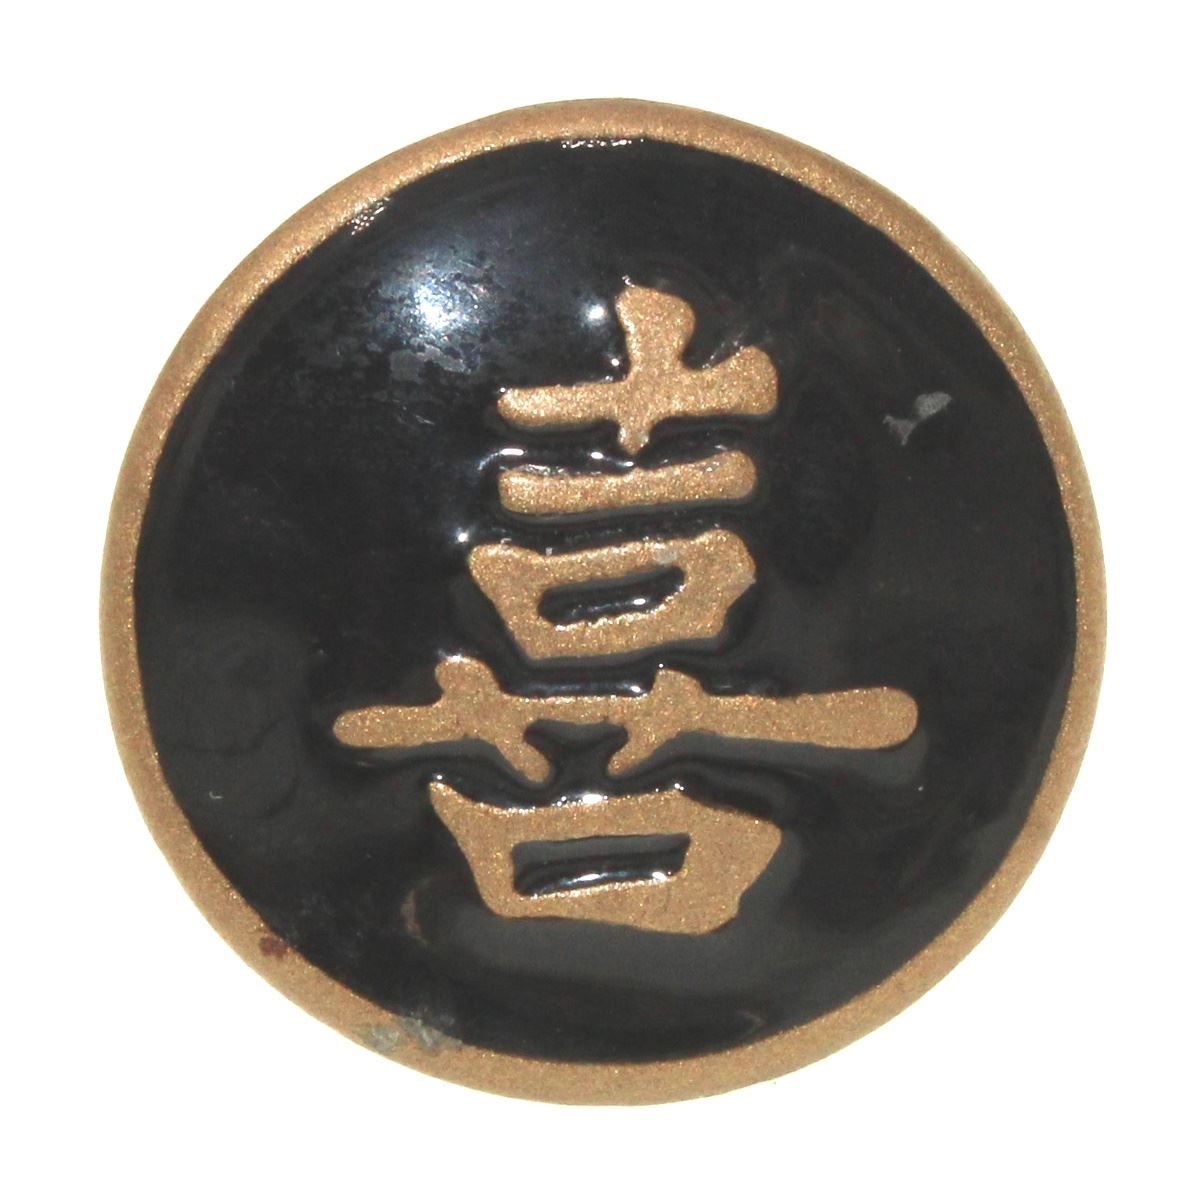 Anne at Home Happiness Kanji Asian 1 1/4" Cabinet Knob Black Gold 226125-19